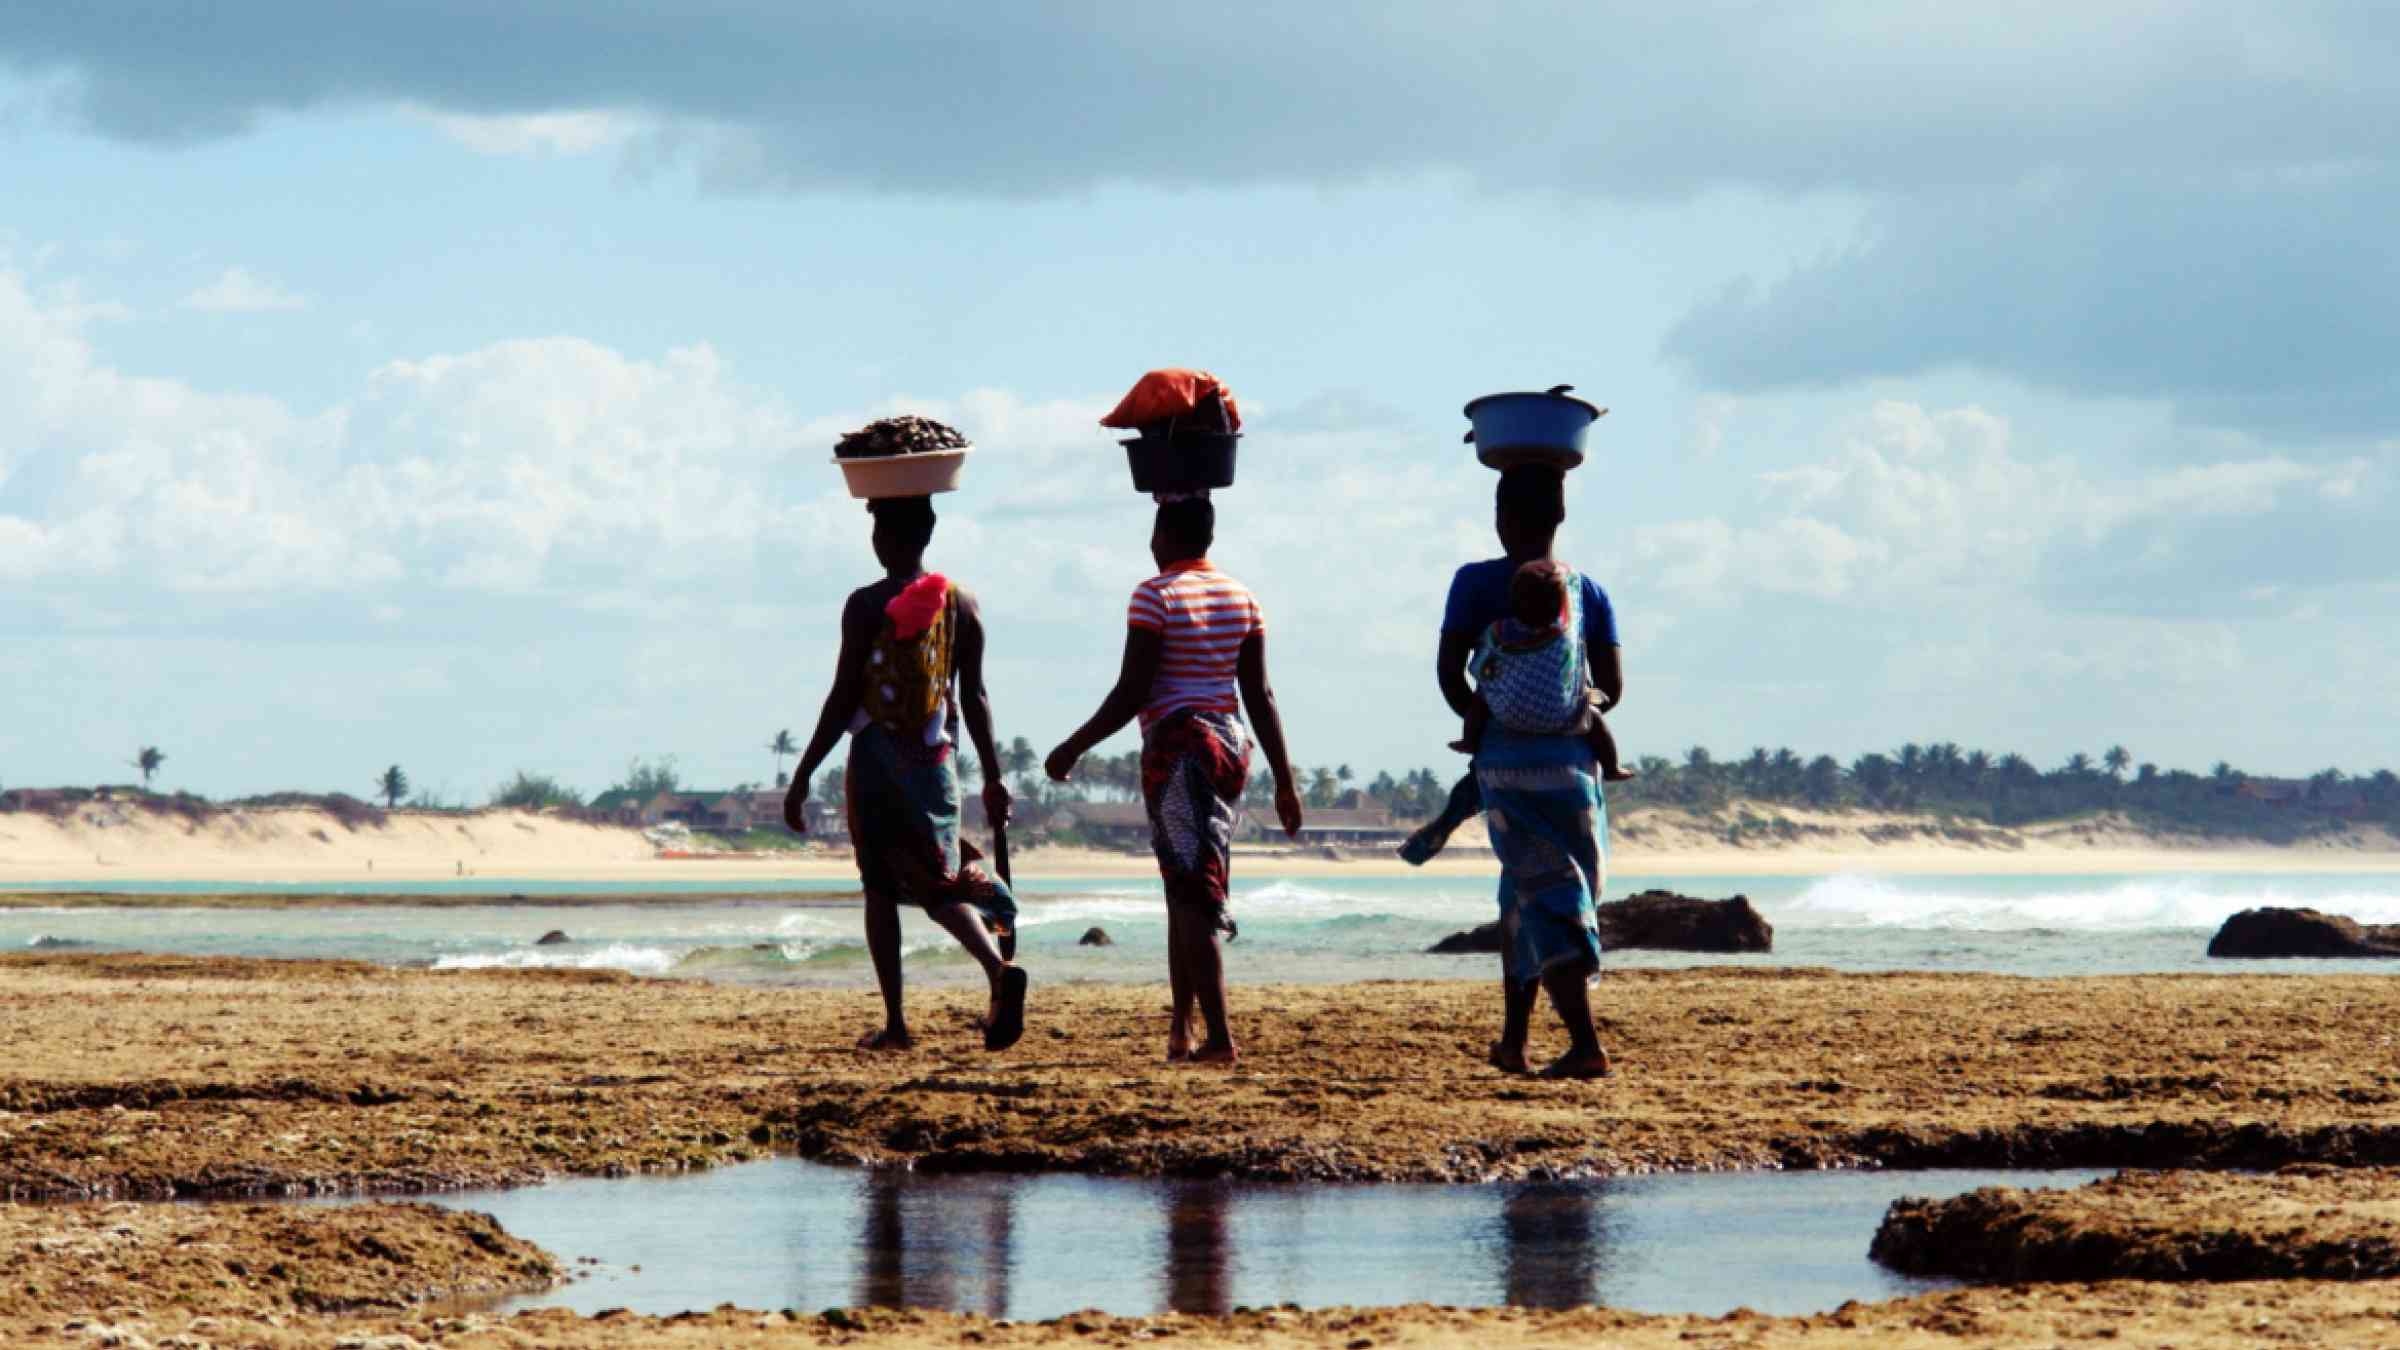 Three women on a beach in a Mozambique